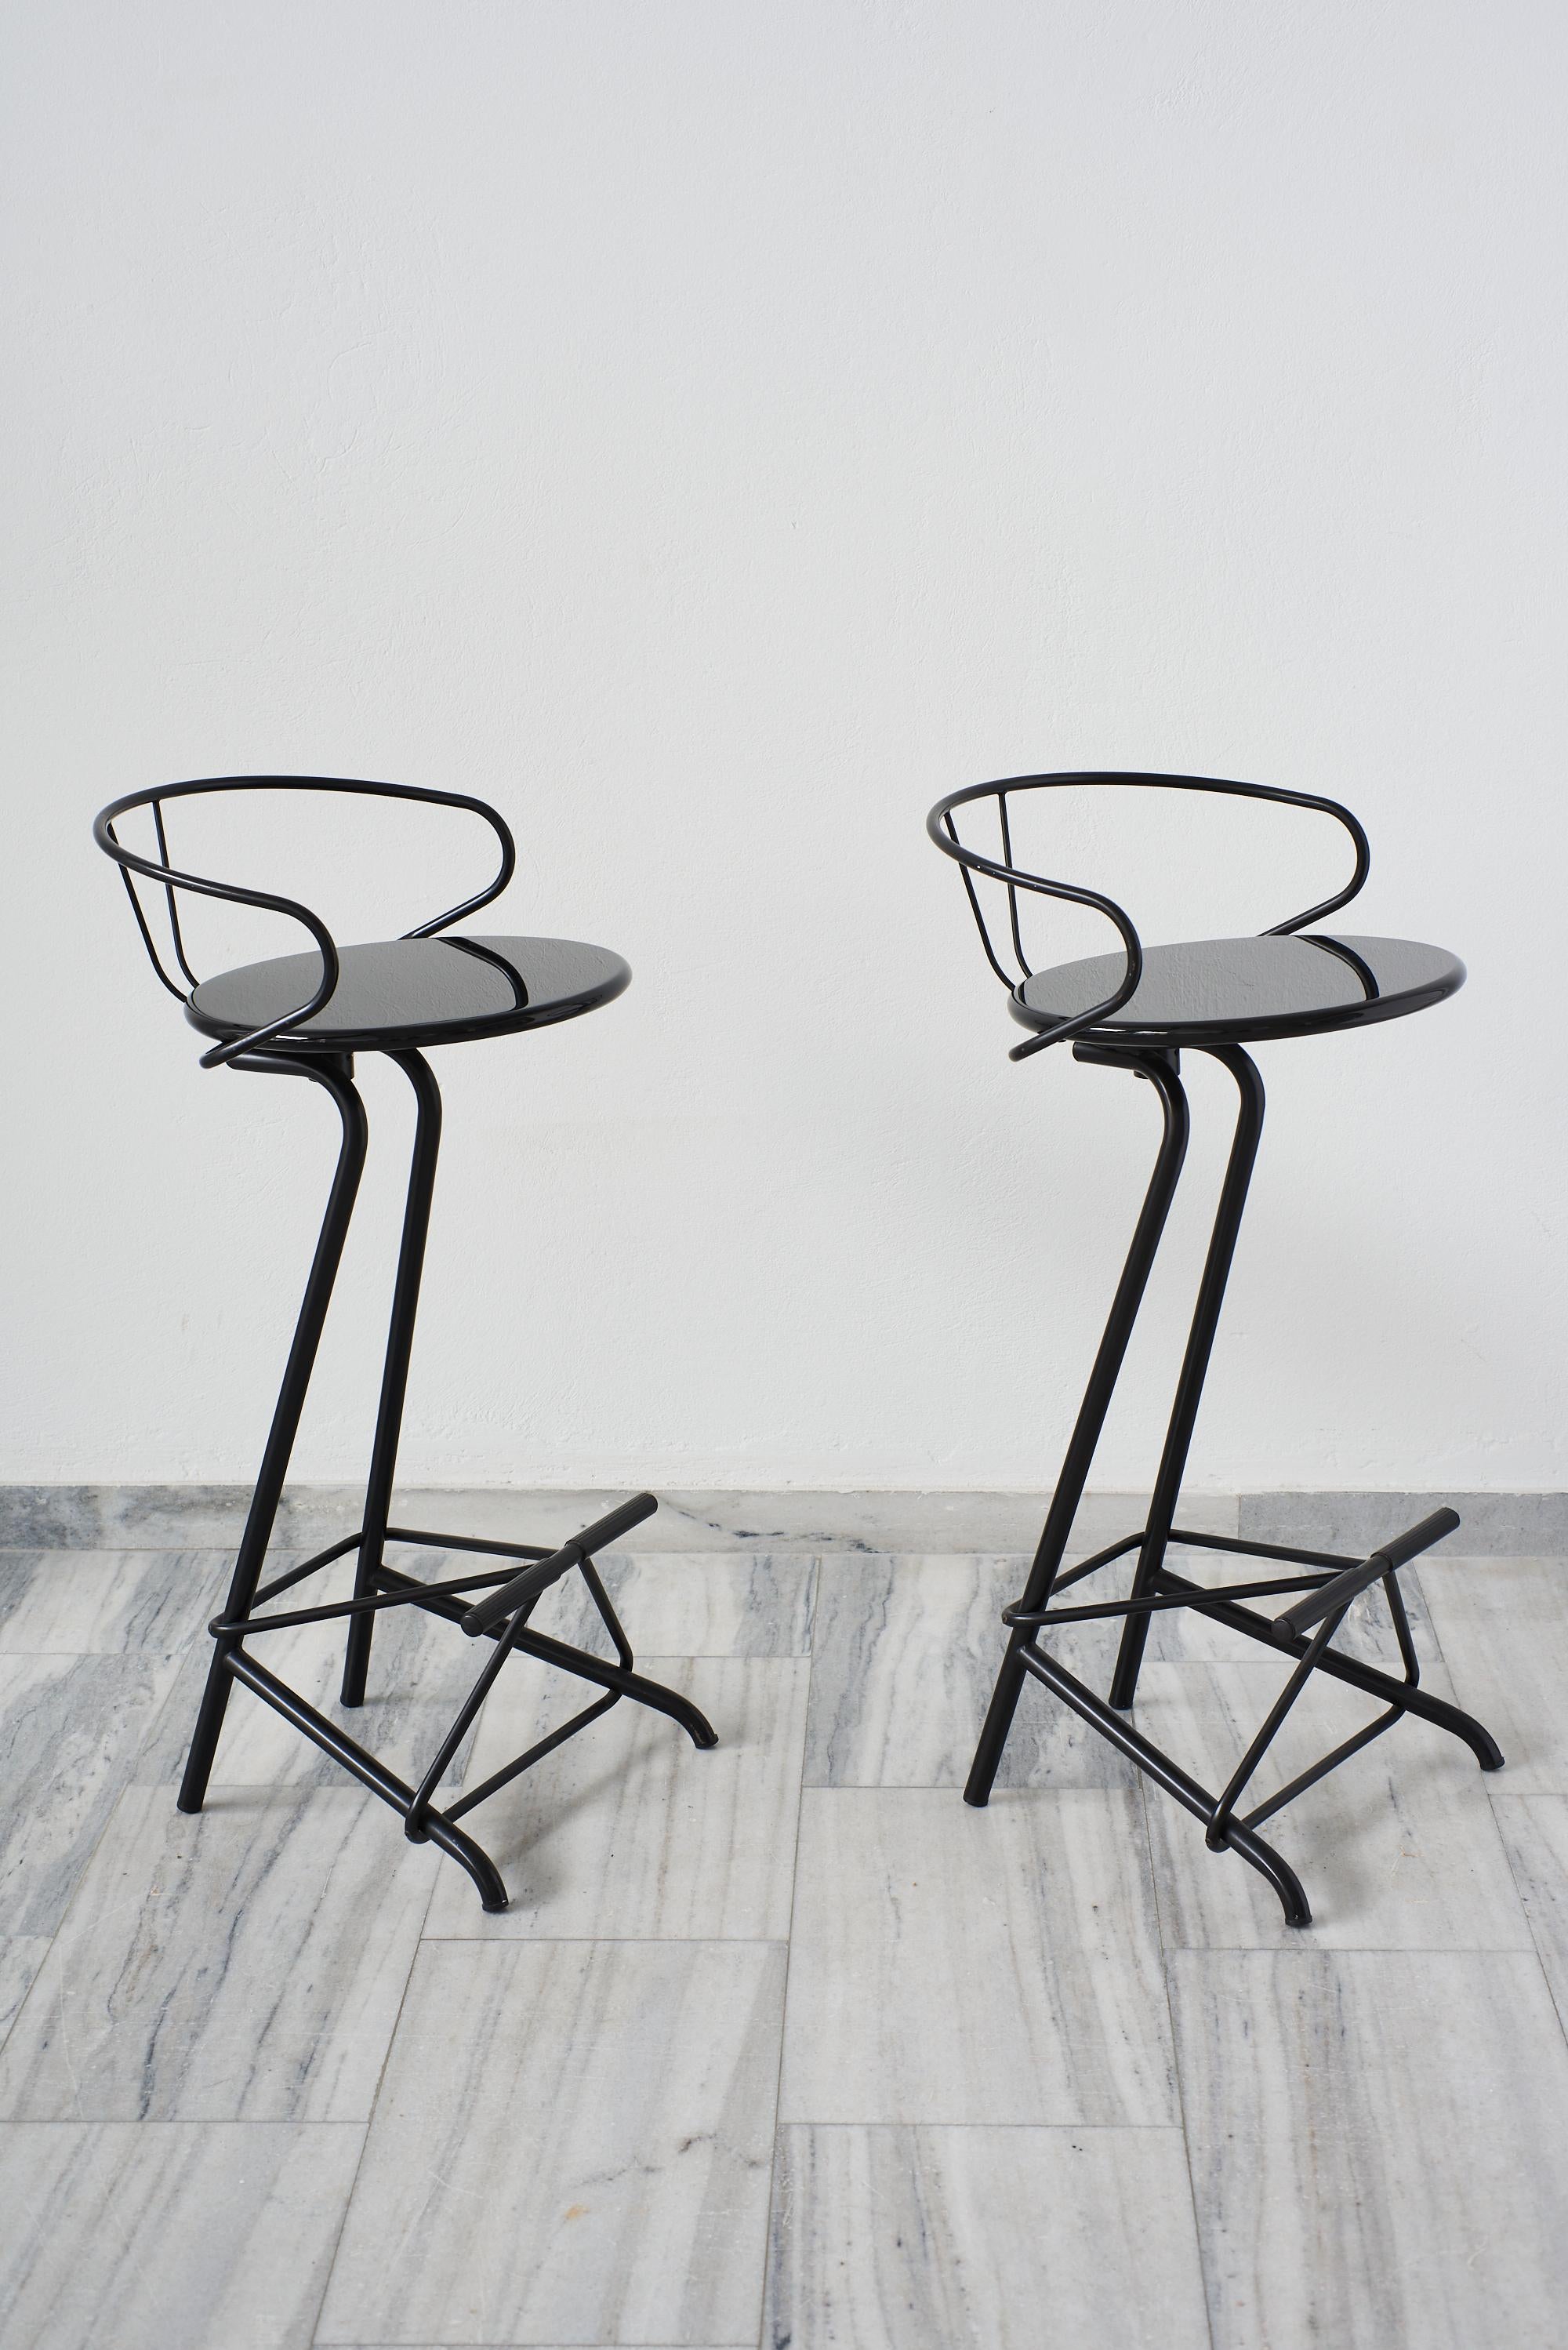 Set of 2 Bar stools, black lacquer, black metal.Italy 1980s.
Beautiful design in excellent condition. The seats rotate 360*
Price is for the set of 2.